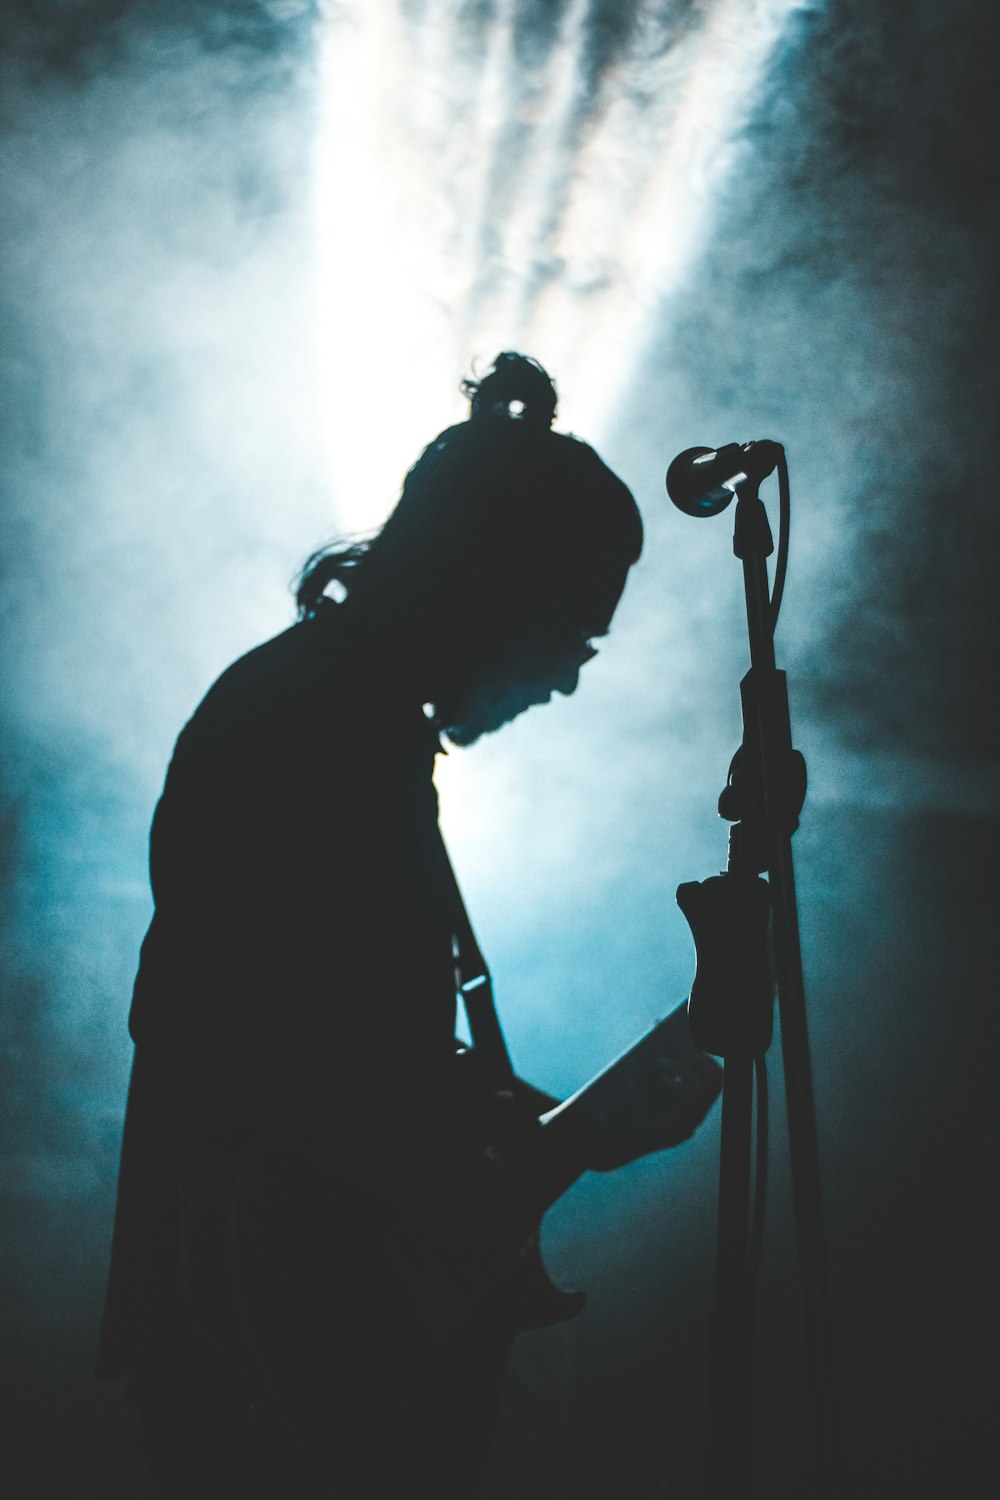 silhouette photography of person playing guitar